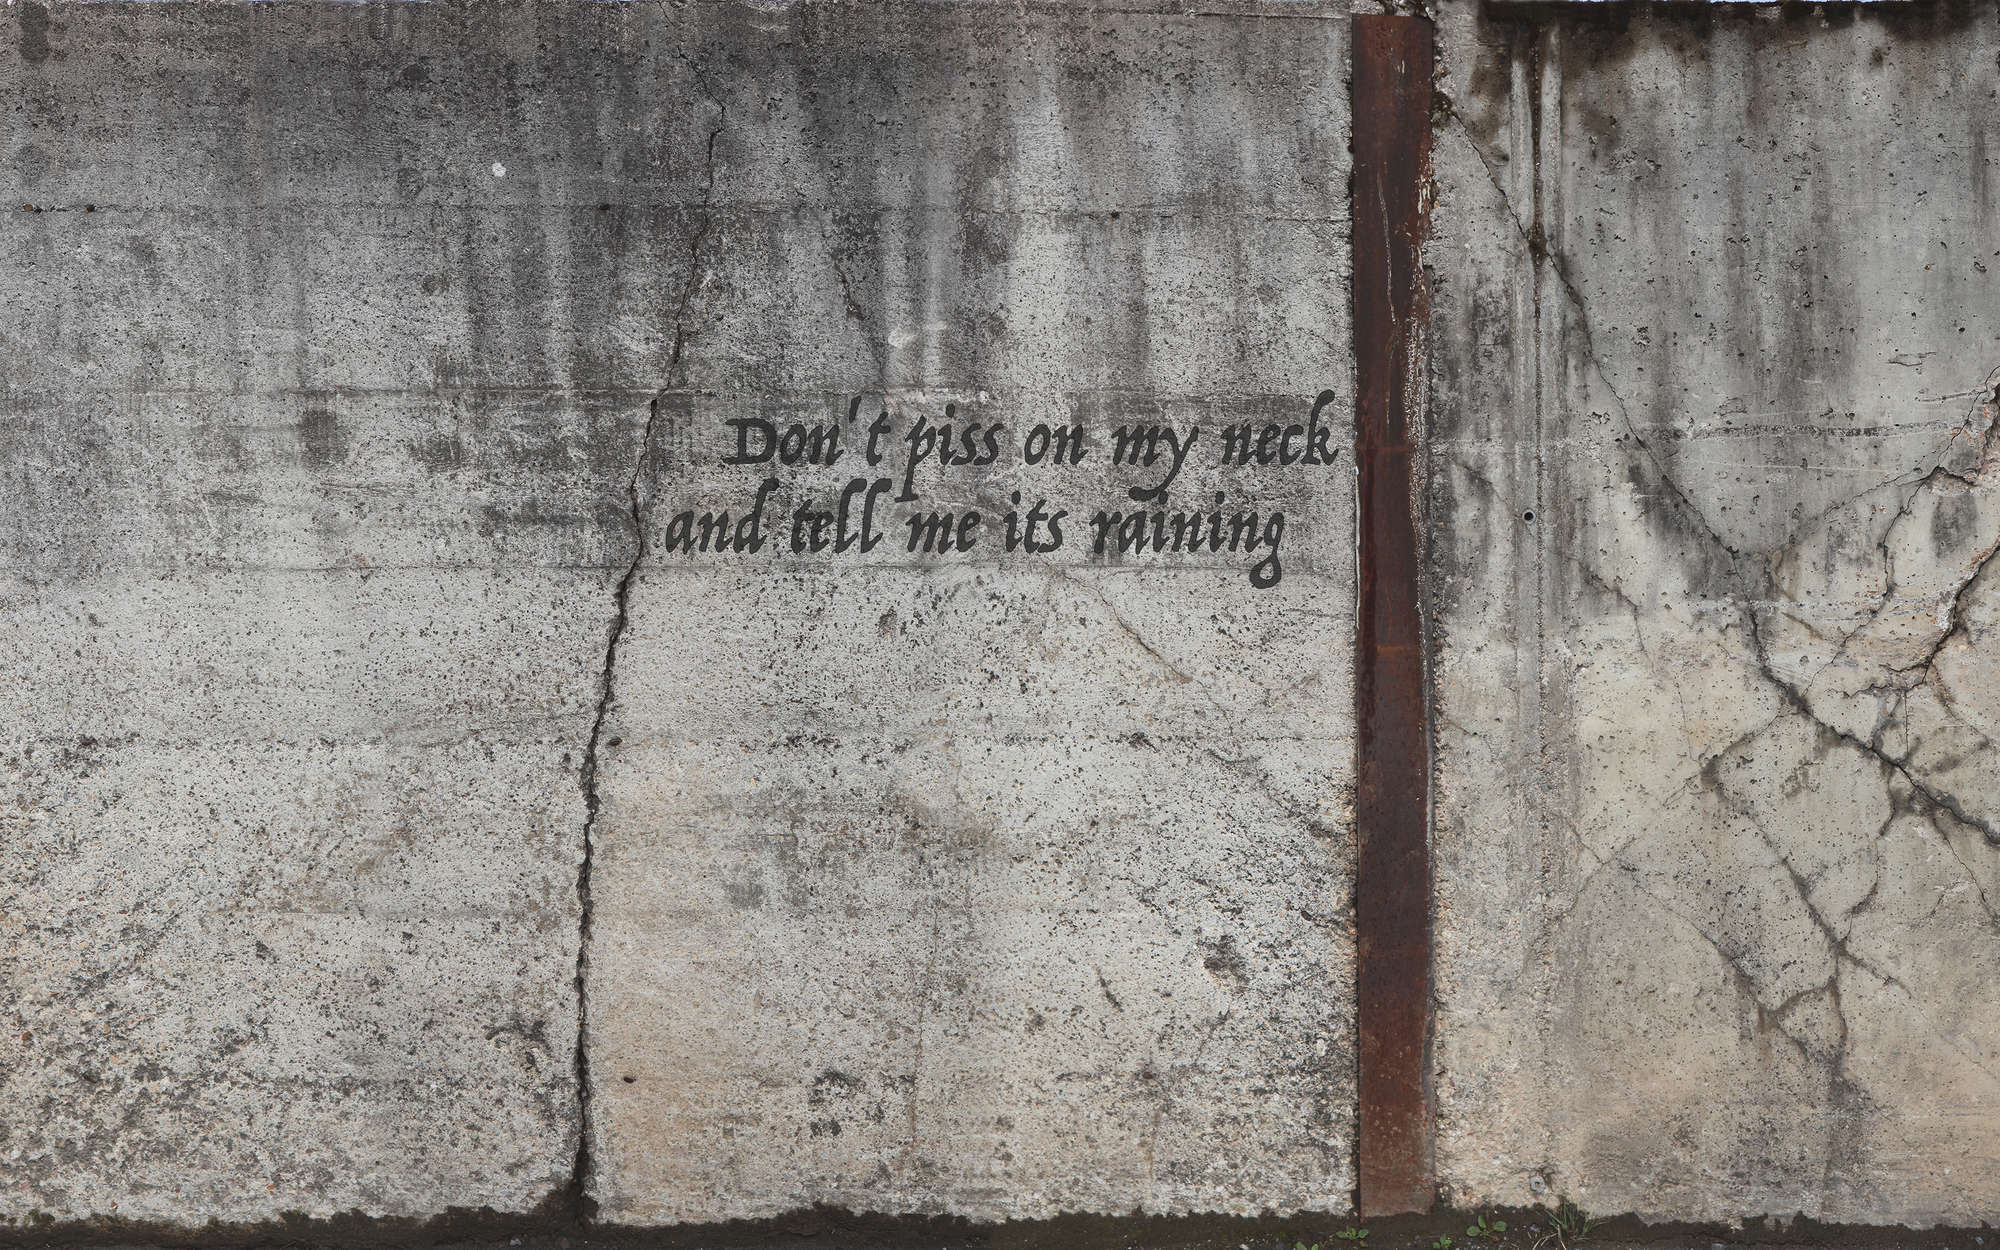             Photo wallpaper old concrete wall and lettering - Matt smooth fleece
        